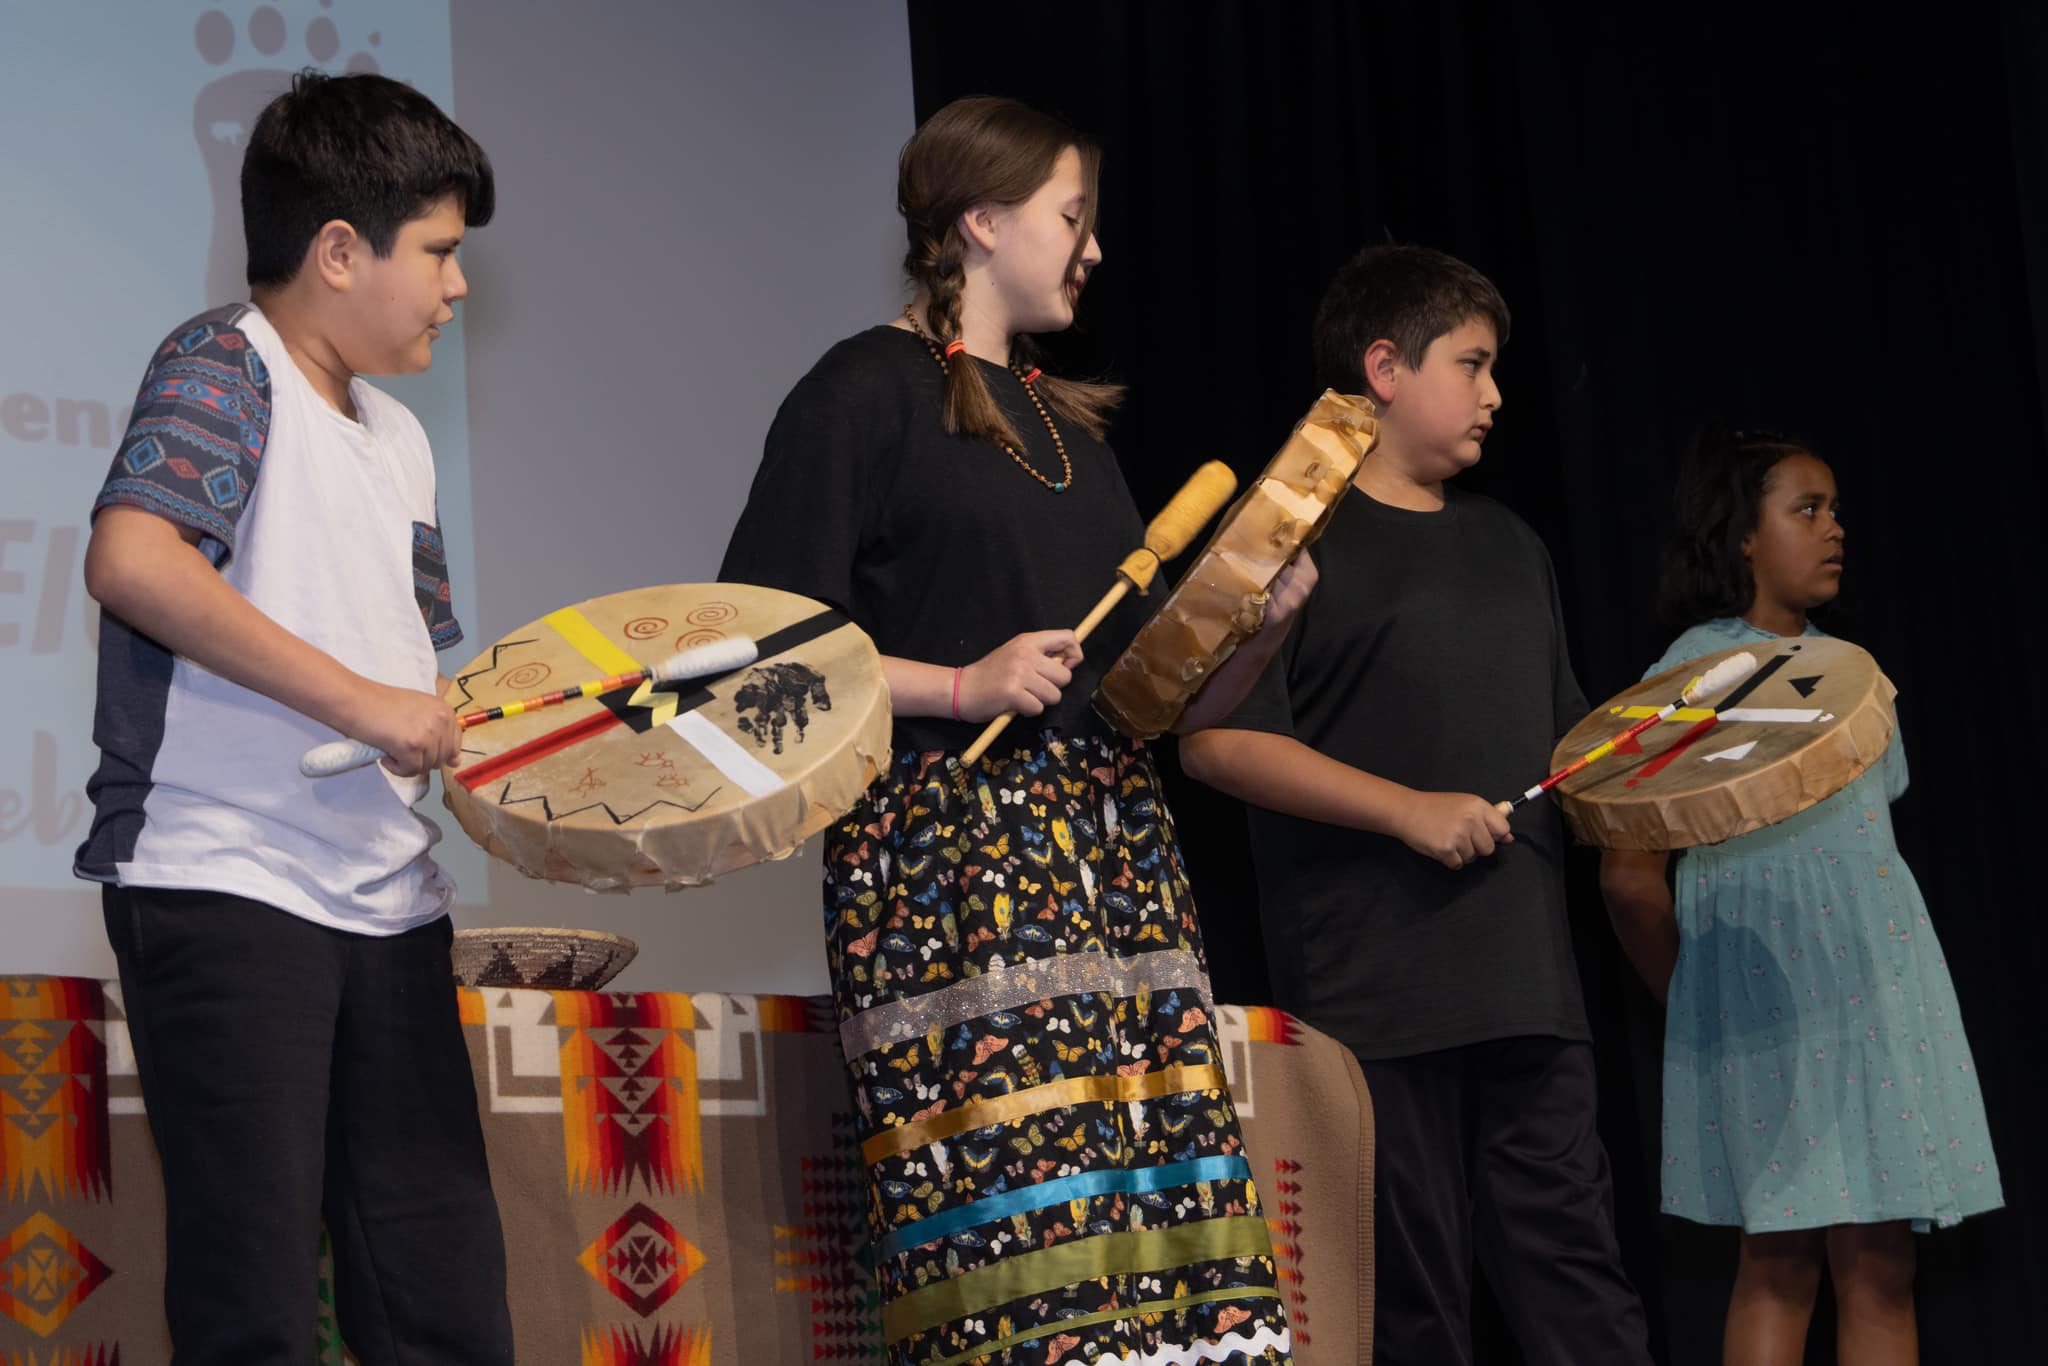 Title VI Students Perform with handdrums